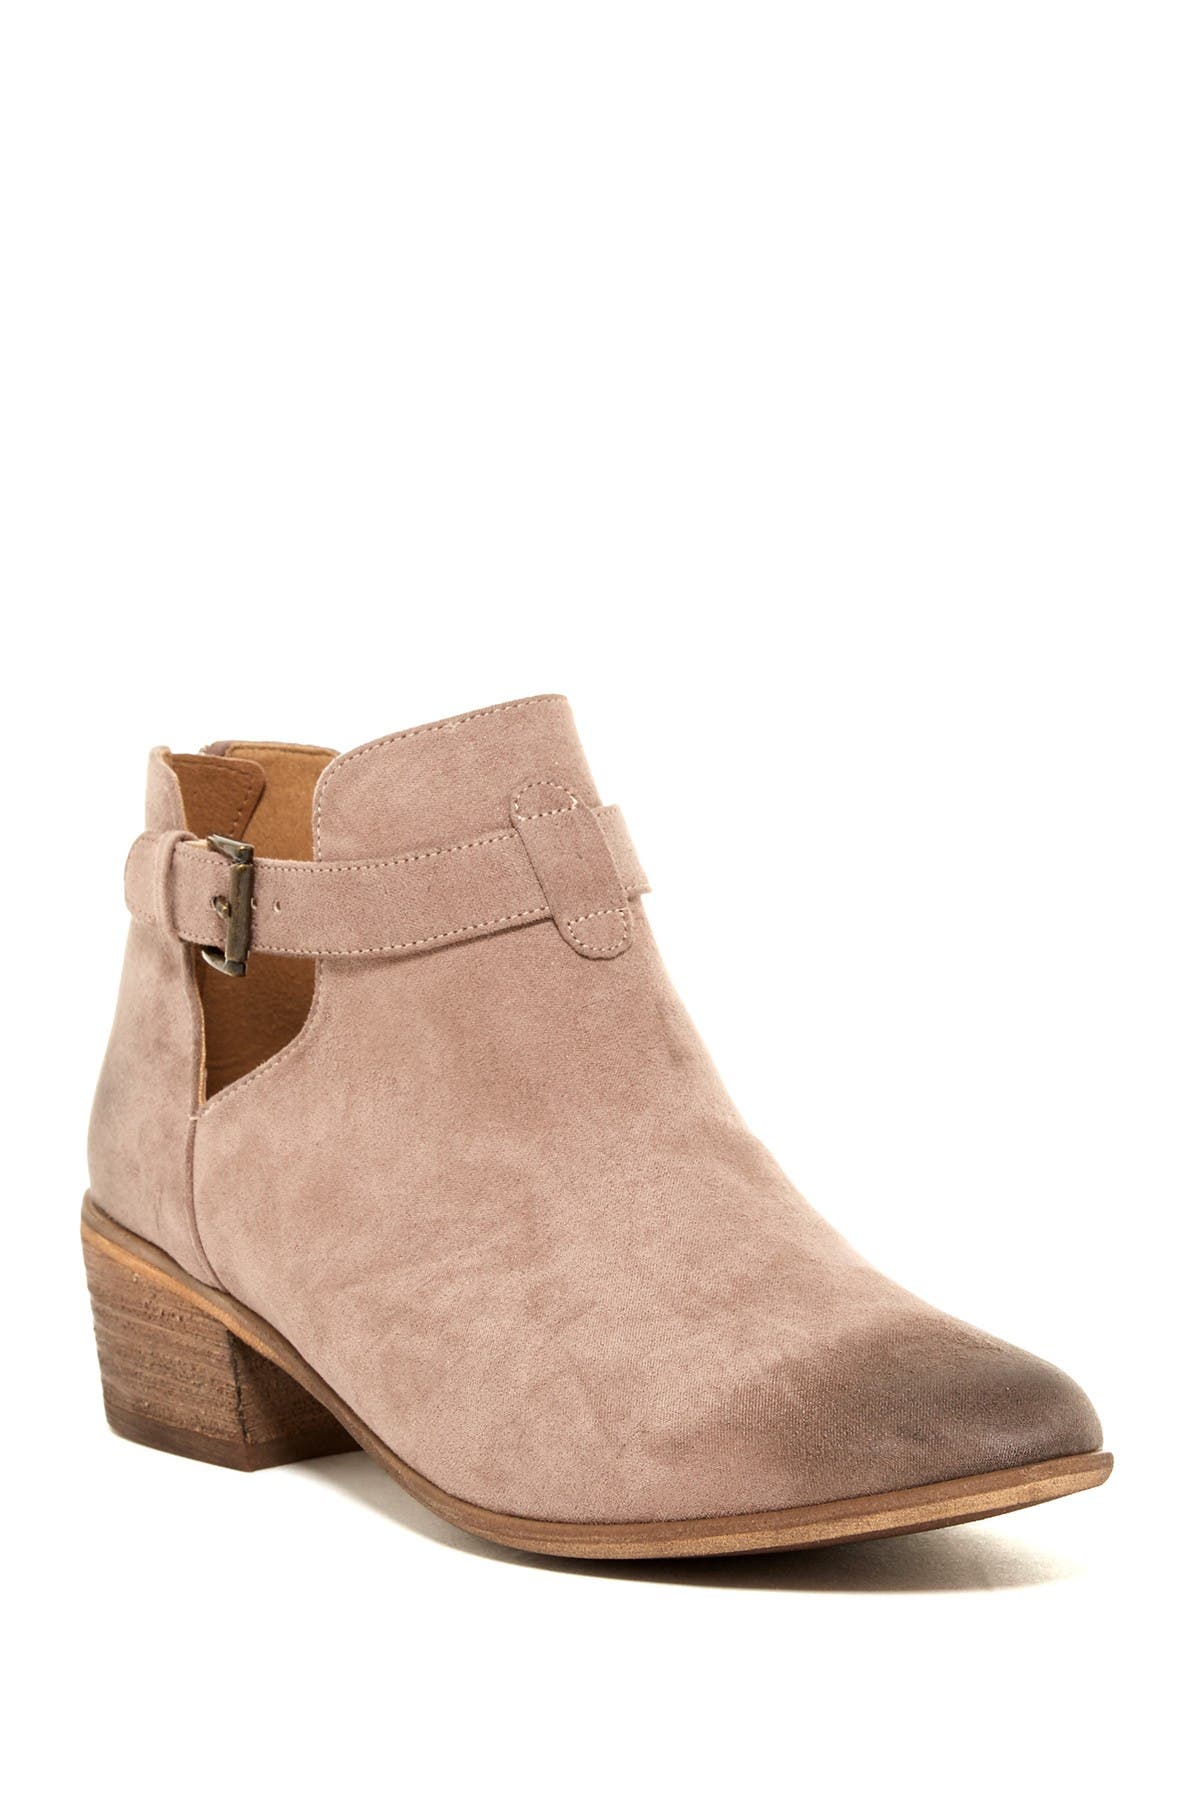 Abound | Layton Ankle Bootie 